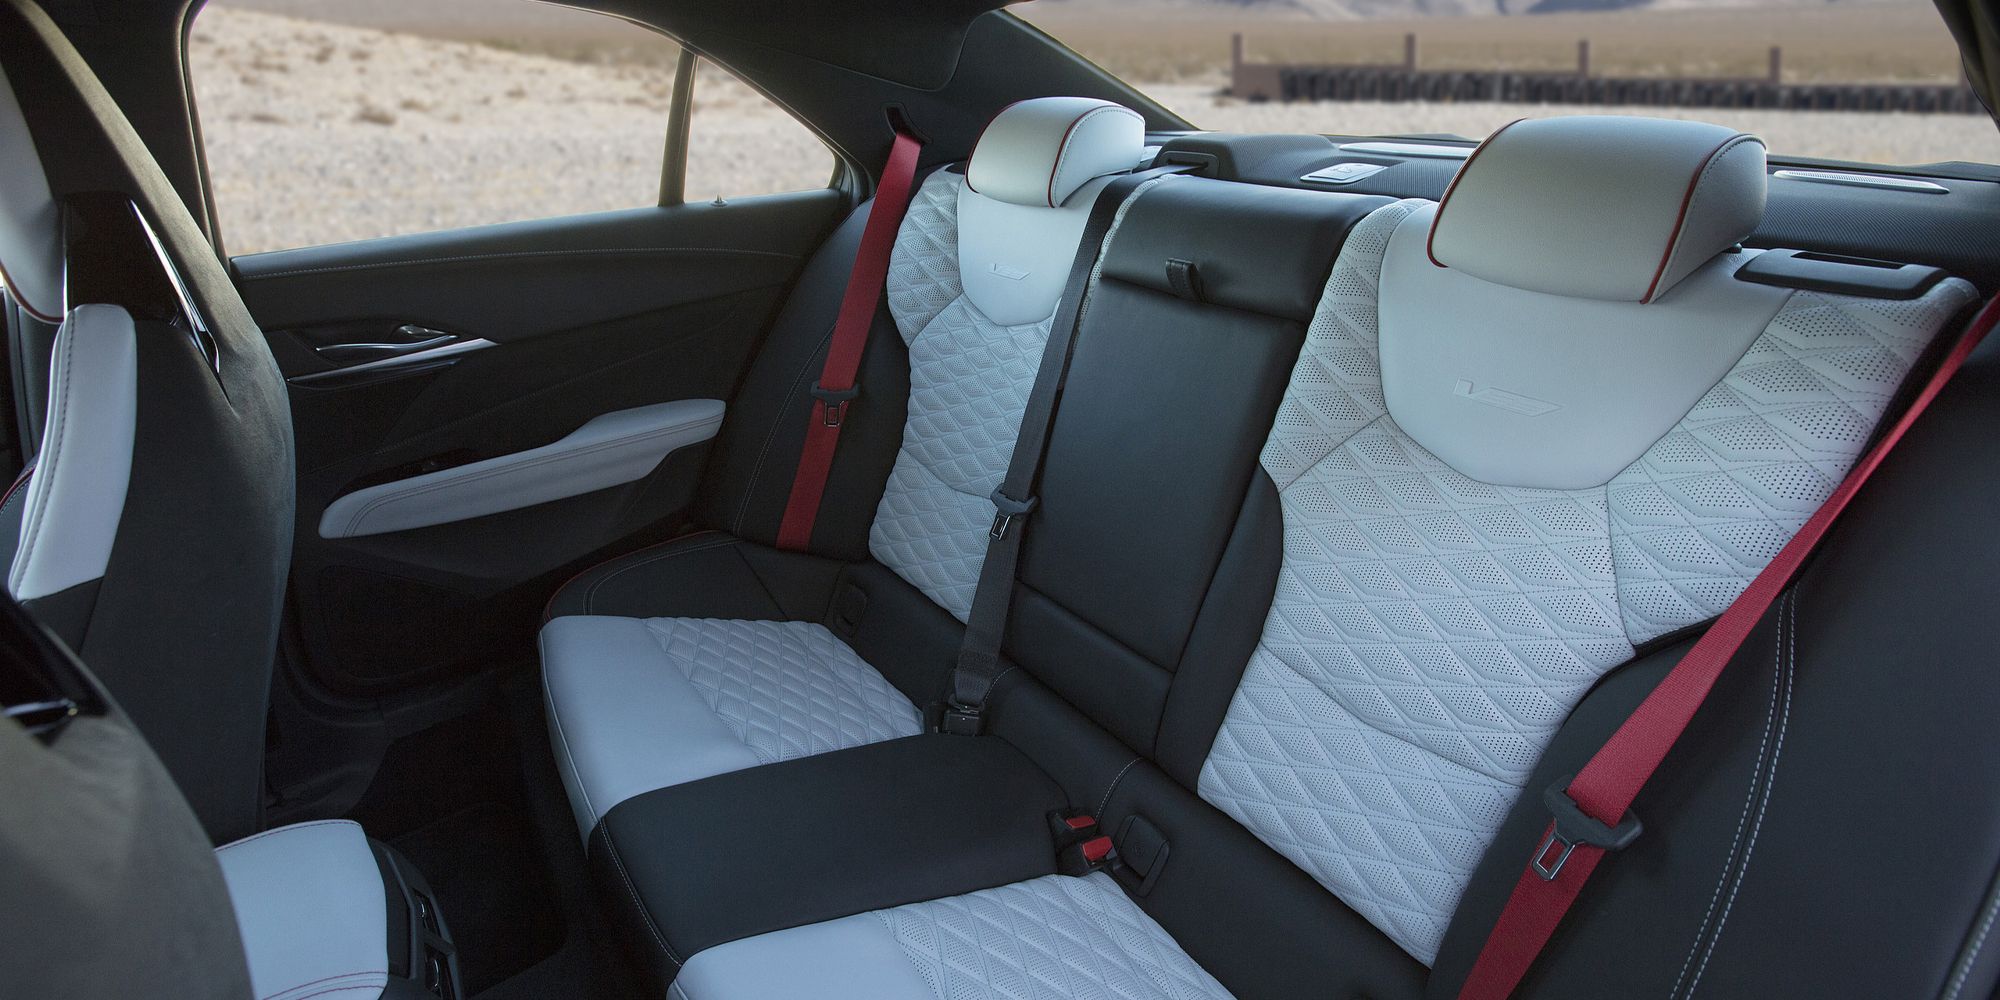 The rear seat in the CT4-V Blackwing